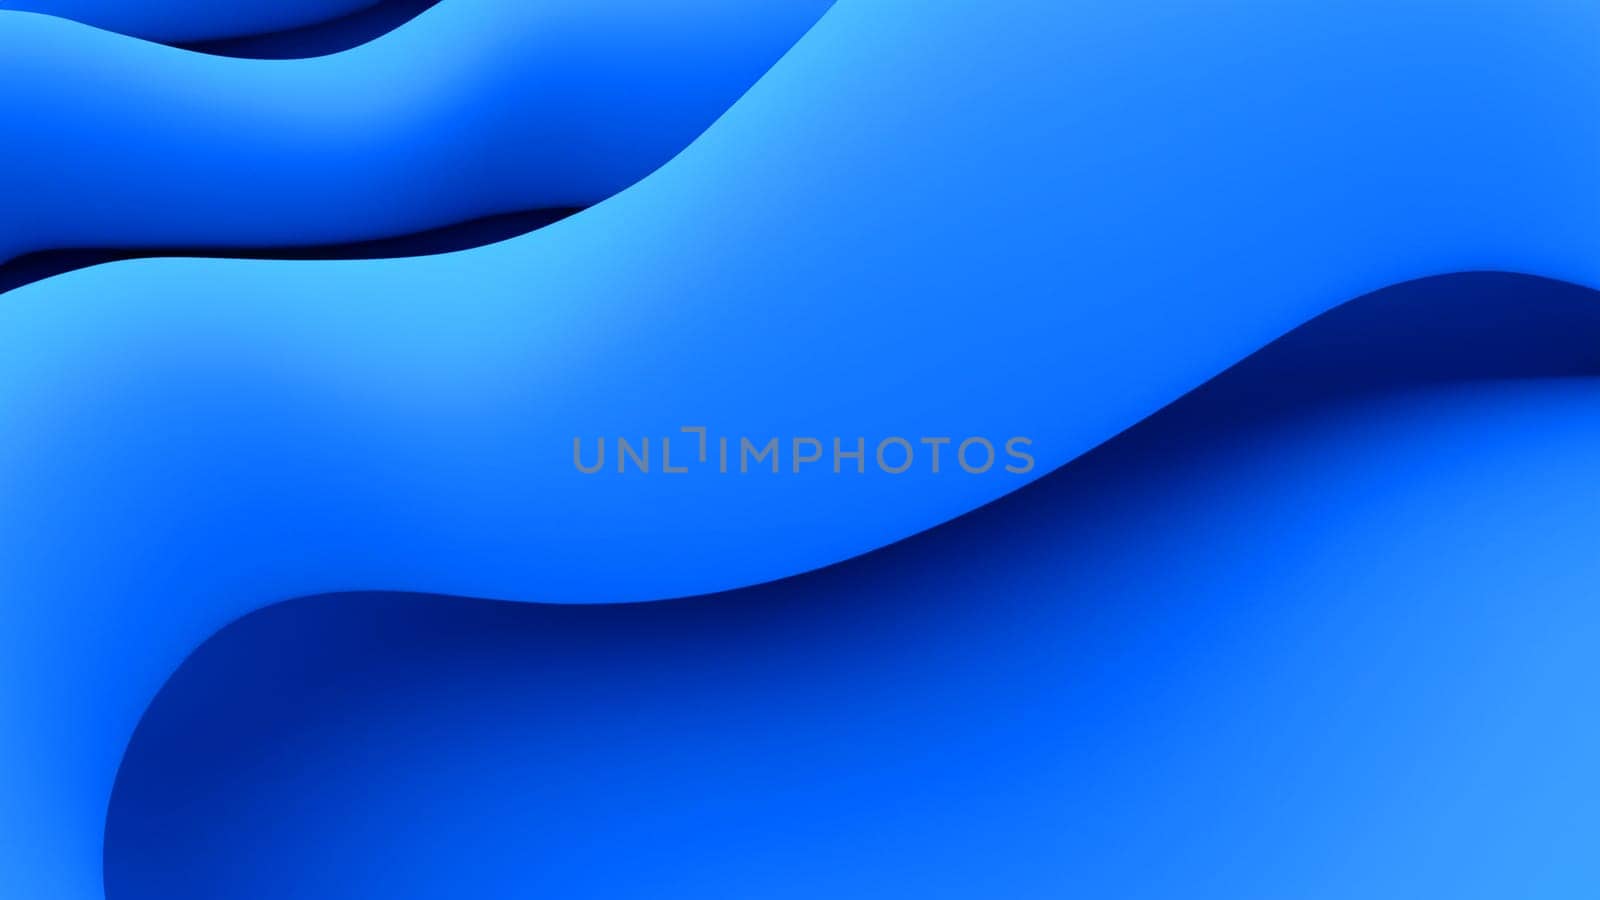 Abstract blue background with wavy lines and shadows. 3d rendering by DesignMarjolein